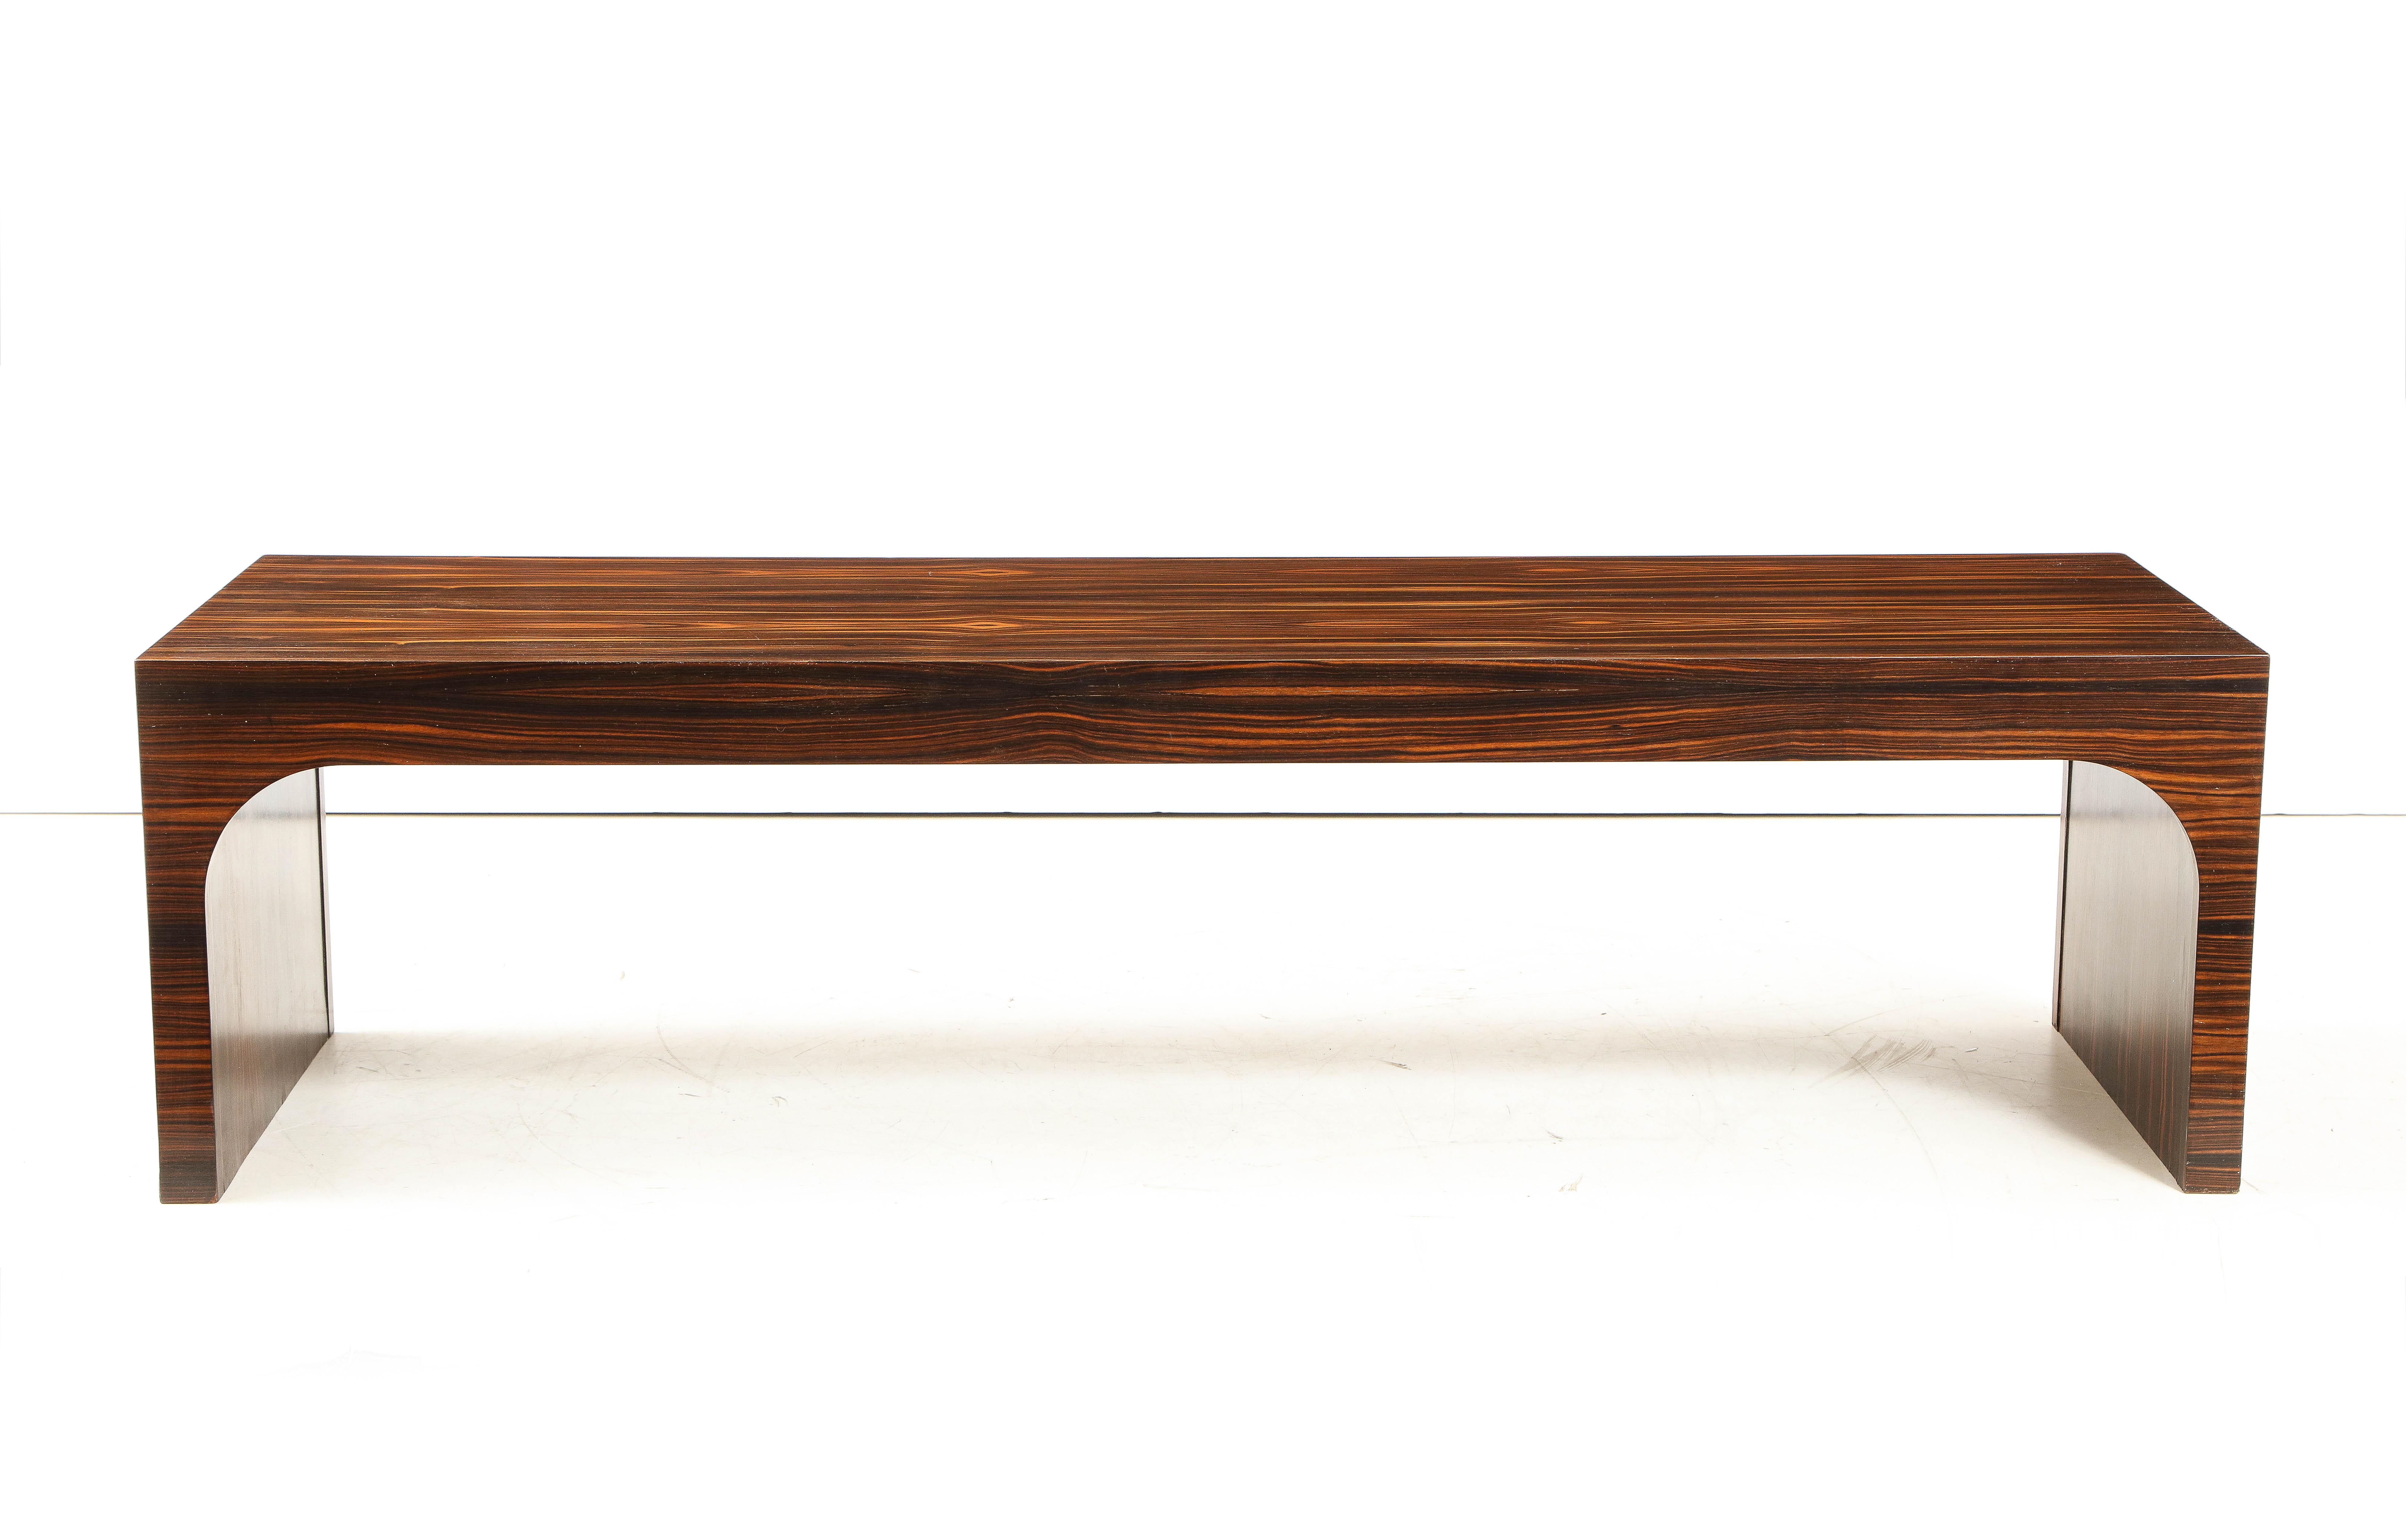 Italian Art Deco Macassar ebony waterfall shaped coffee table or bench. This exotic and very elegant wood was popular in the Art Deco modernist period for its lushness and striking coloration and depth. A stunning and sleek piece.
Italy, circa